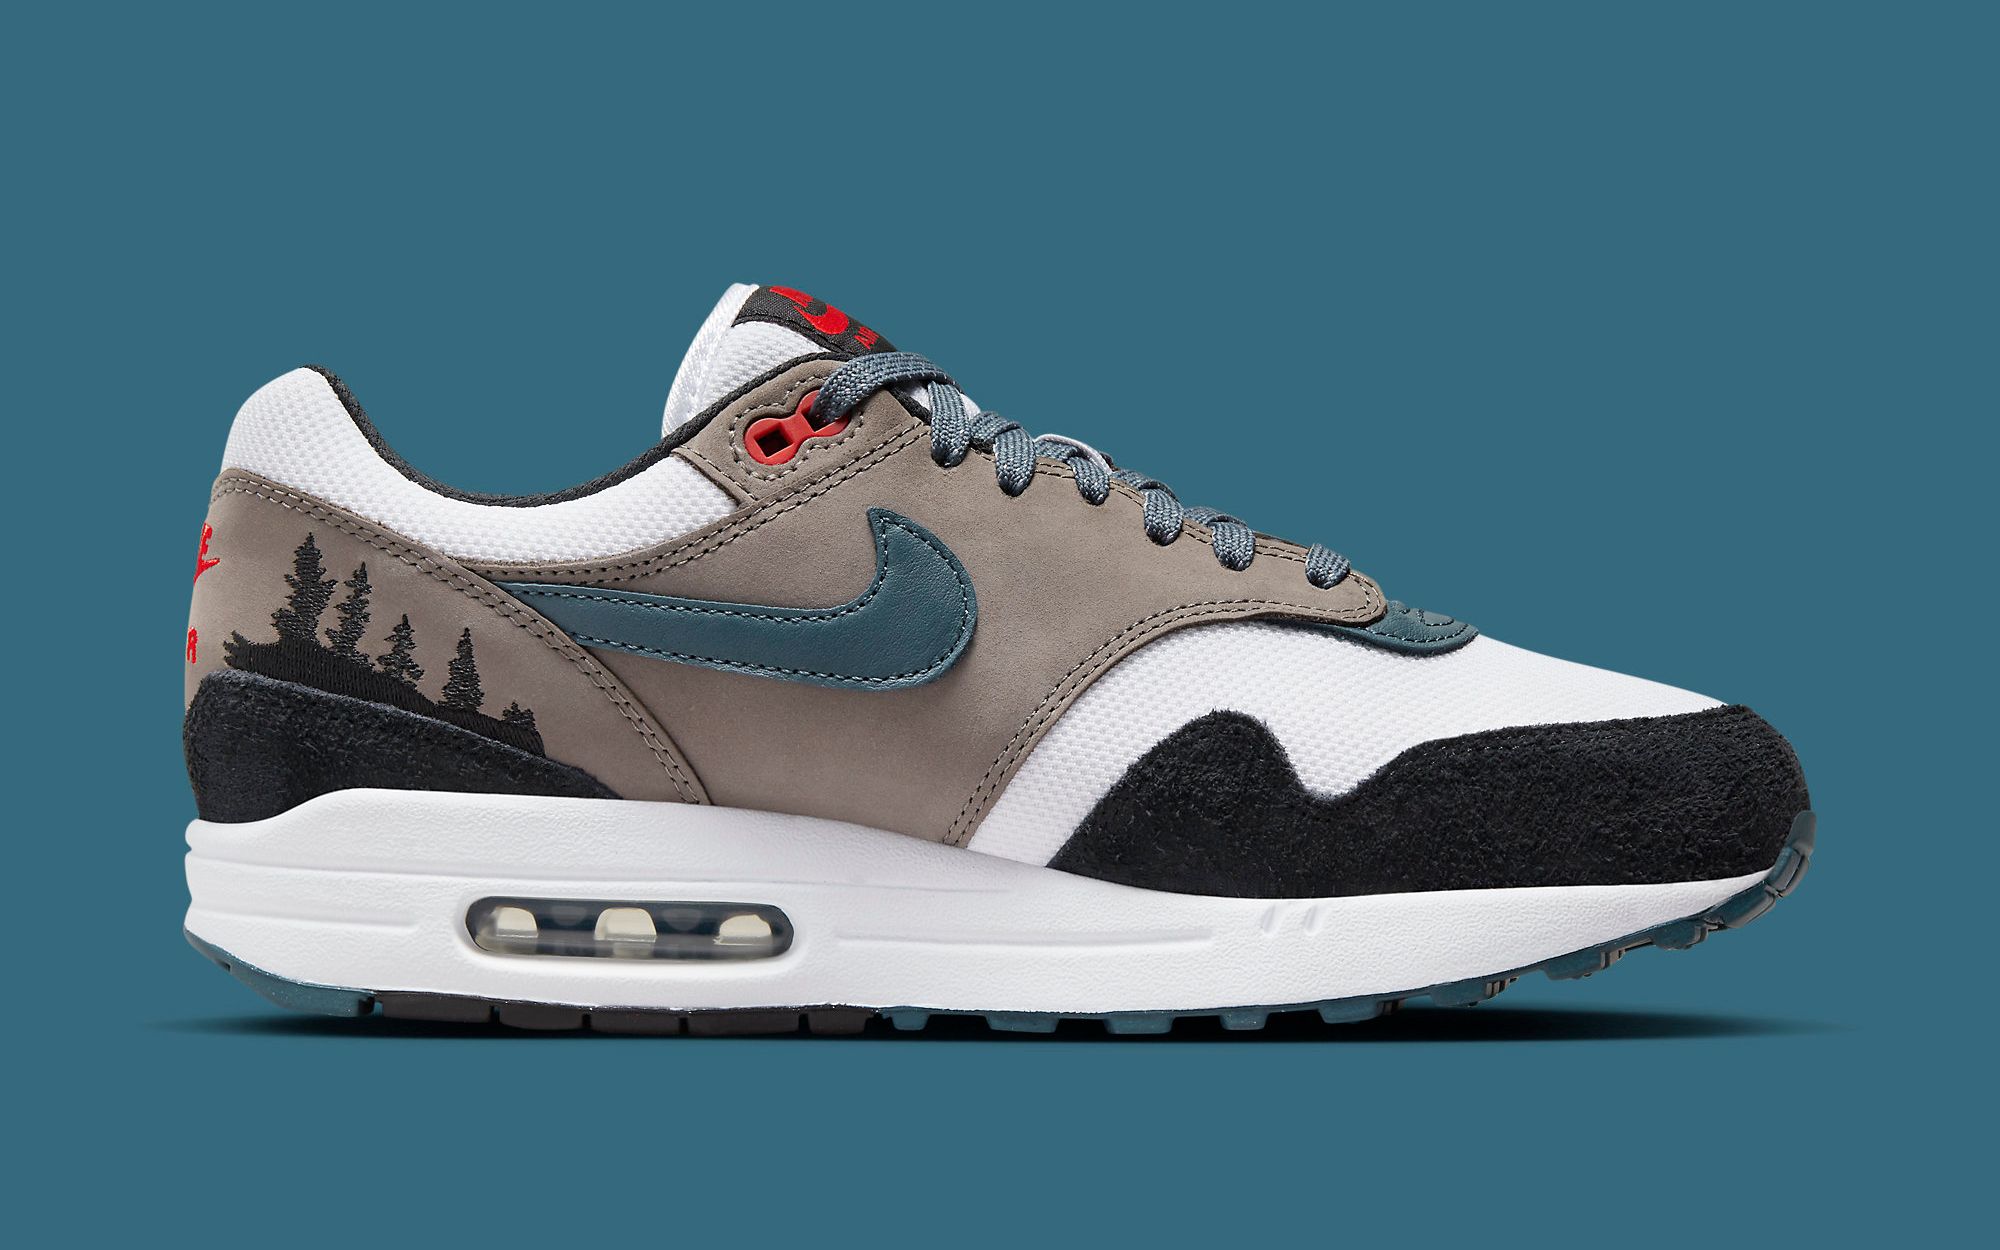 Where to Buy the Nike Air Max 1 PRM “Escape” | House of Heat°